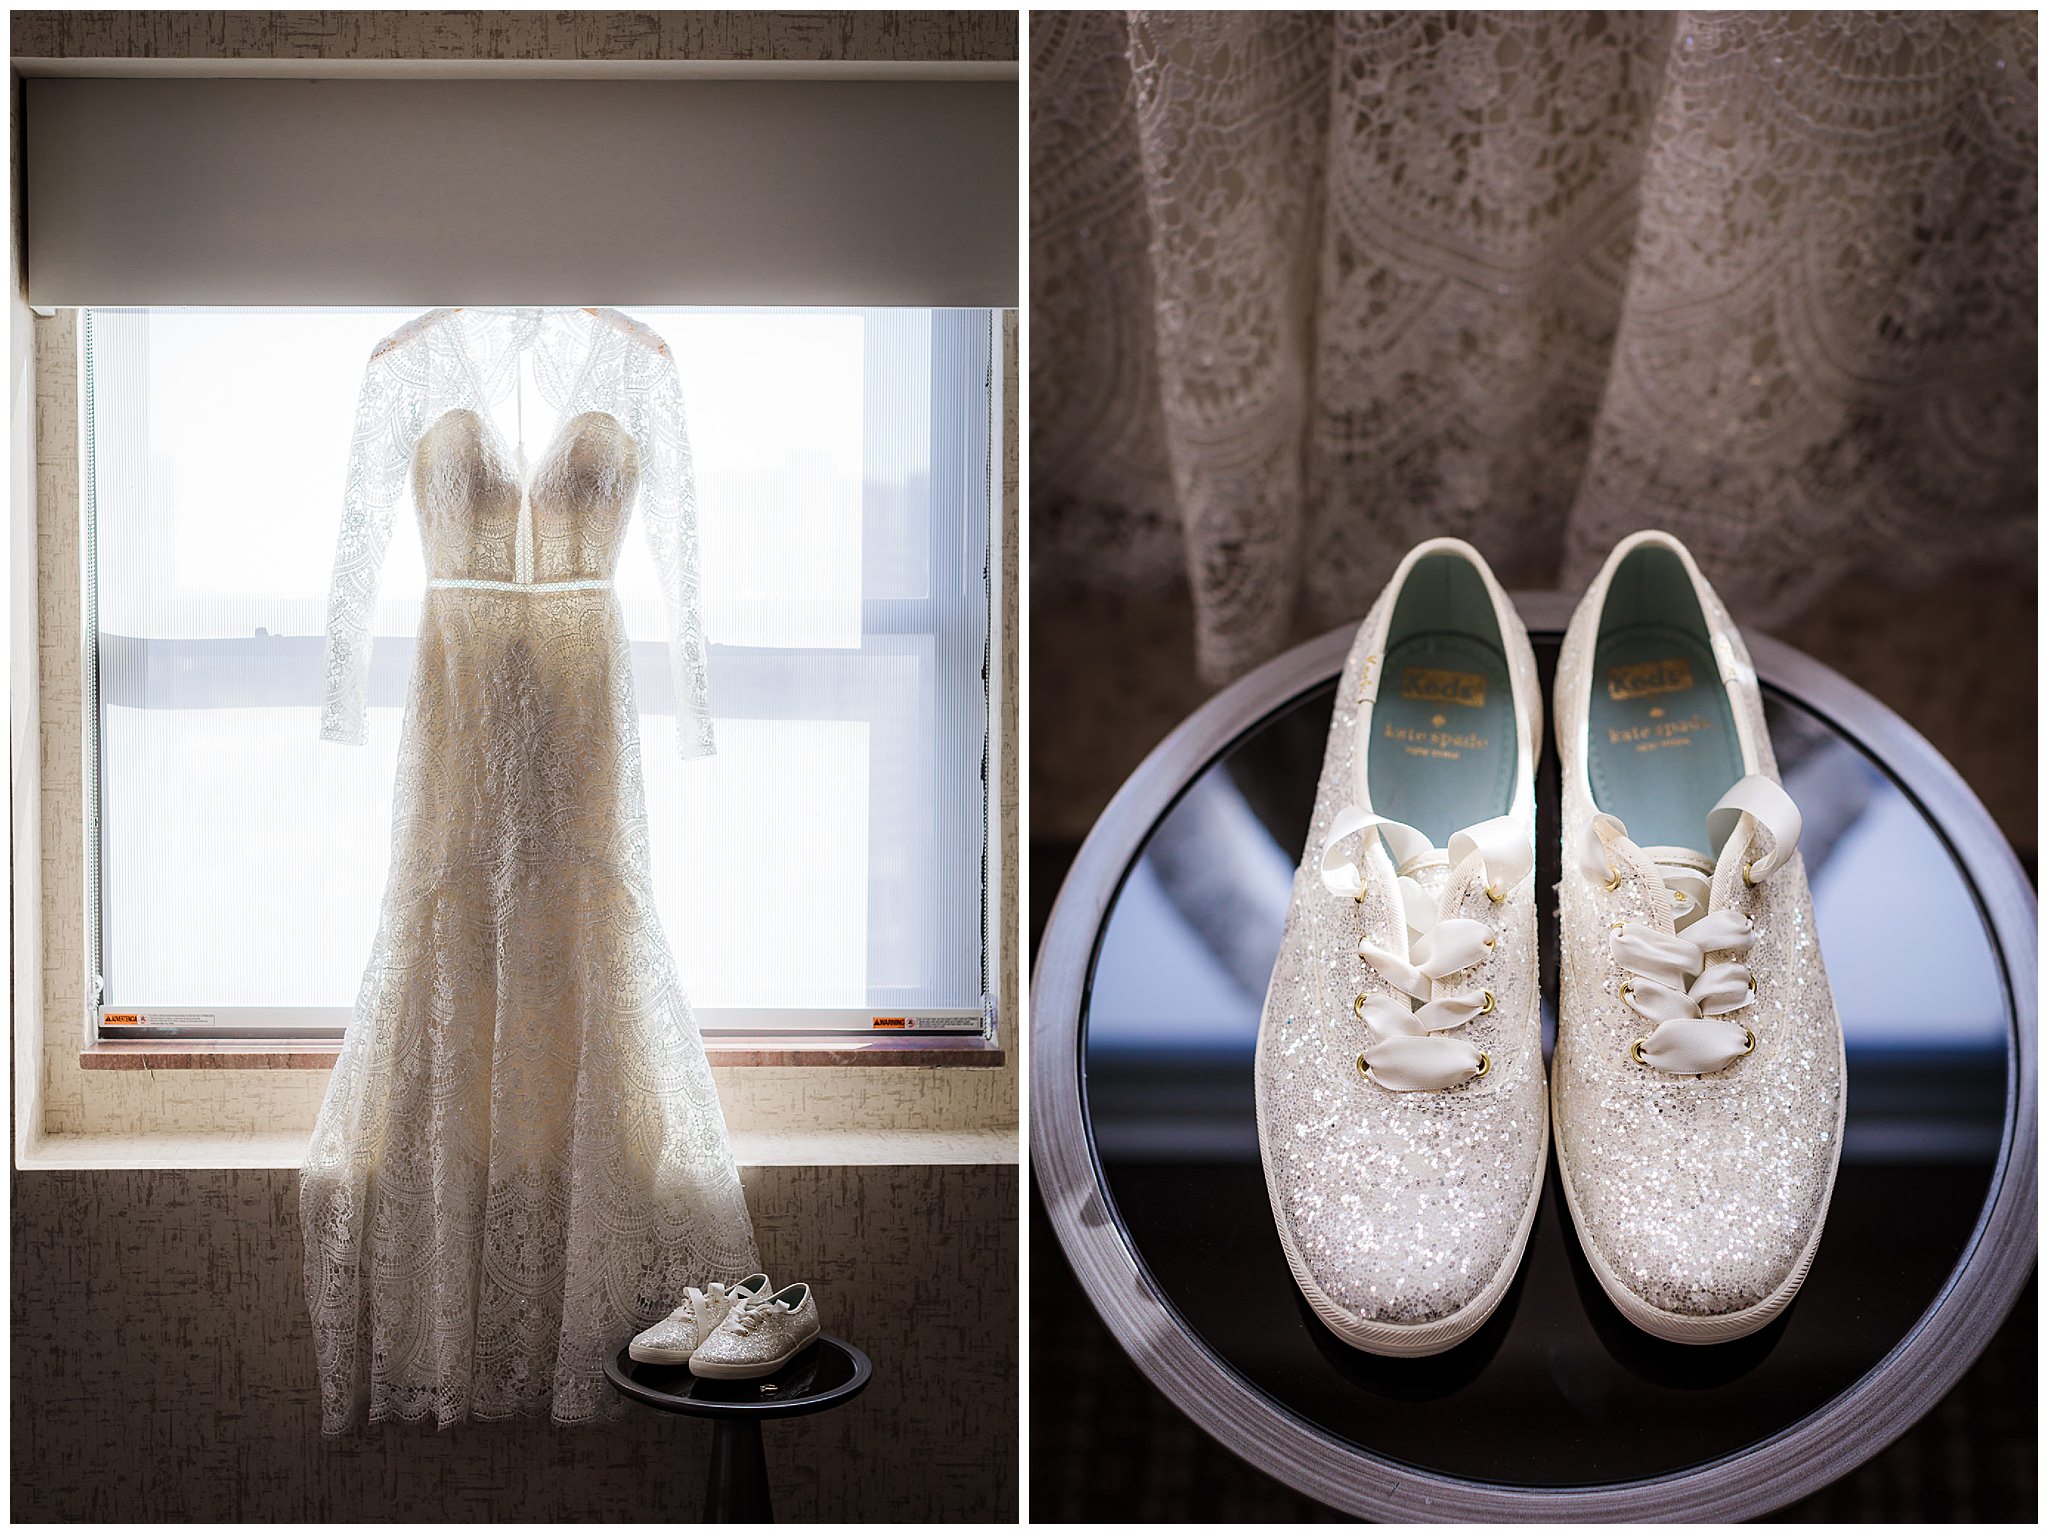 Bride's Wtoo by Watters wedding dress from Bridal Beginning hangs in the window above her white sequence Kate Spade shoes